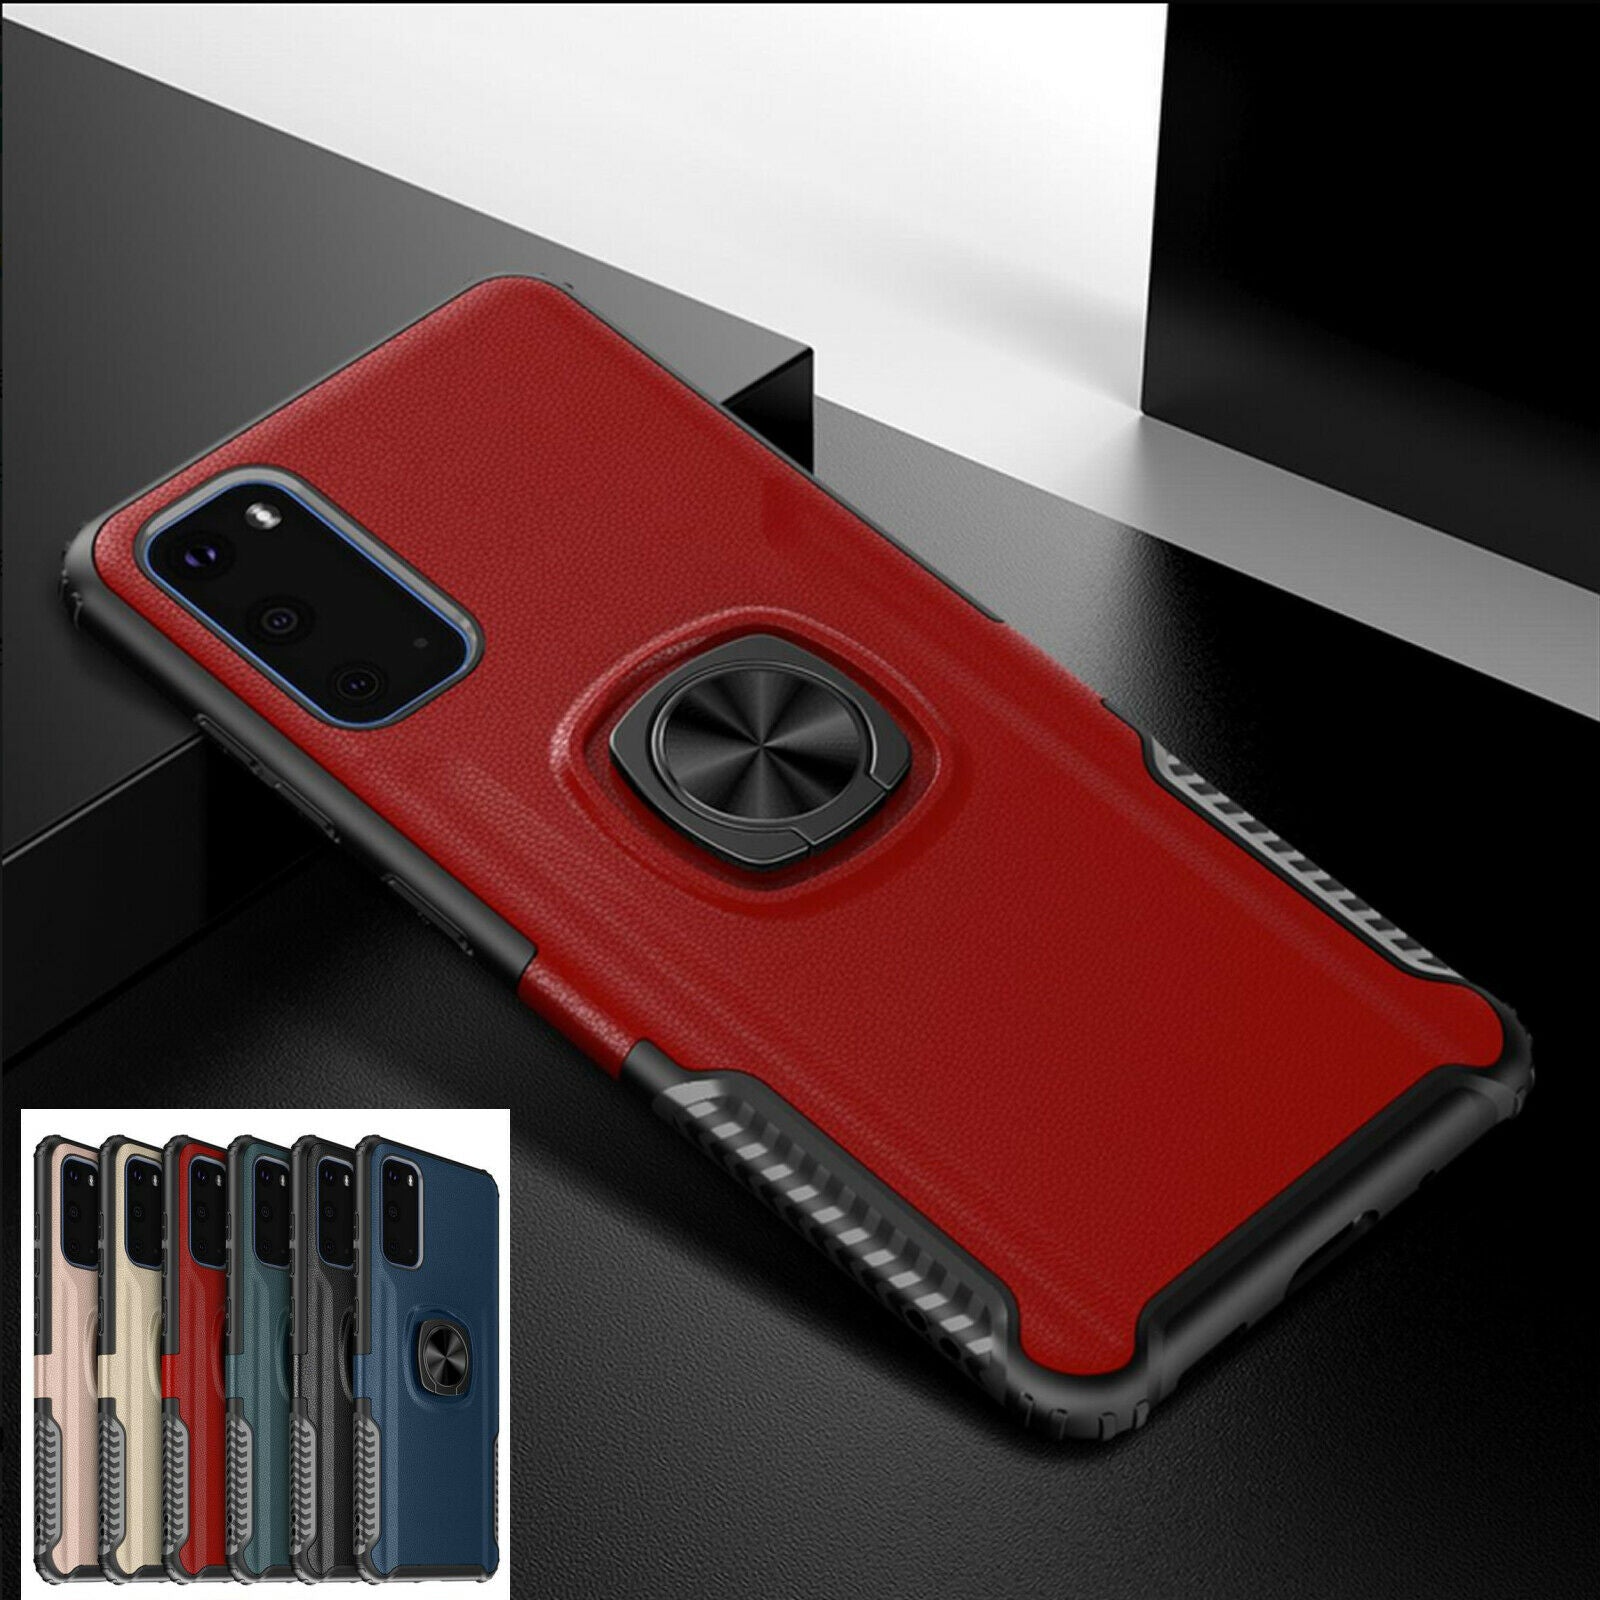 Shockproof Armor Case Ring For Samsung Galaxy - carolay.co